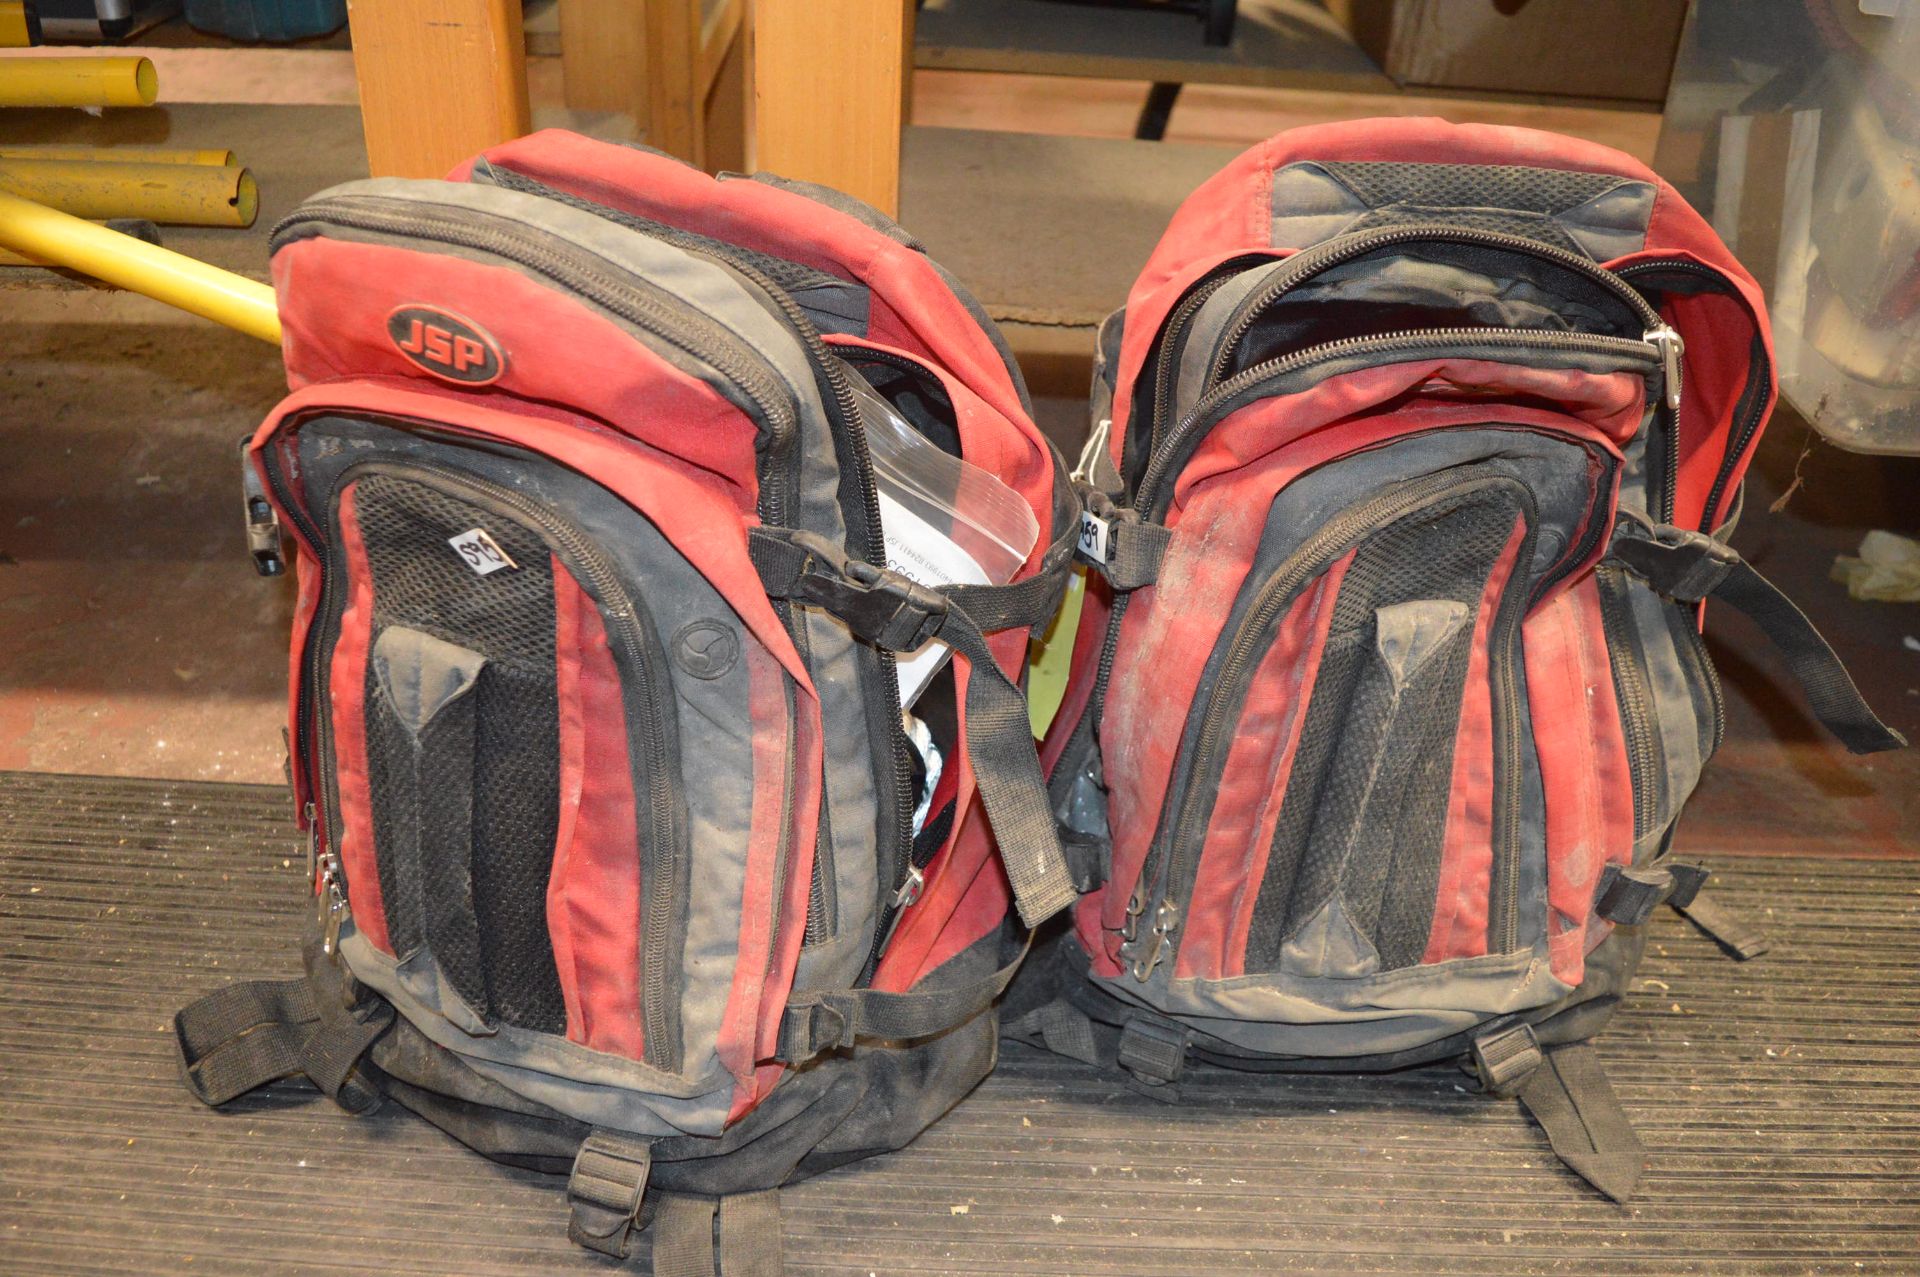 Two JSP Bags with Restraining Equipment